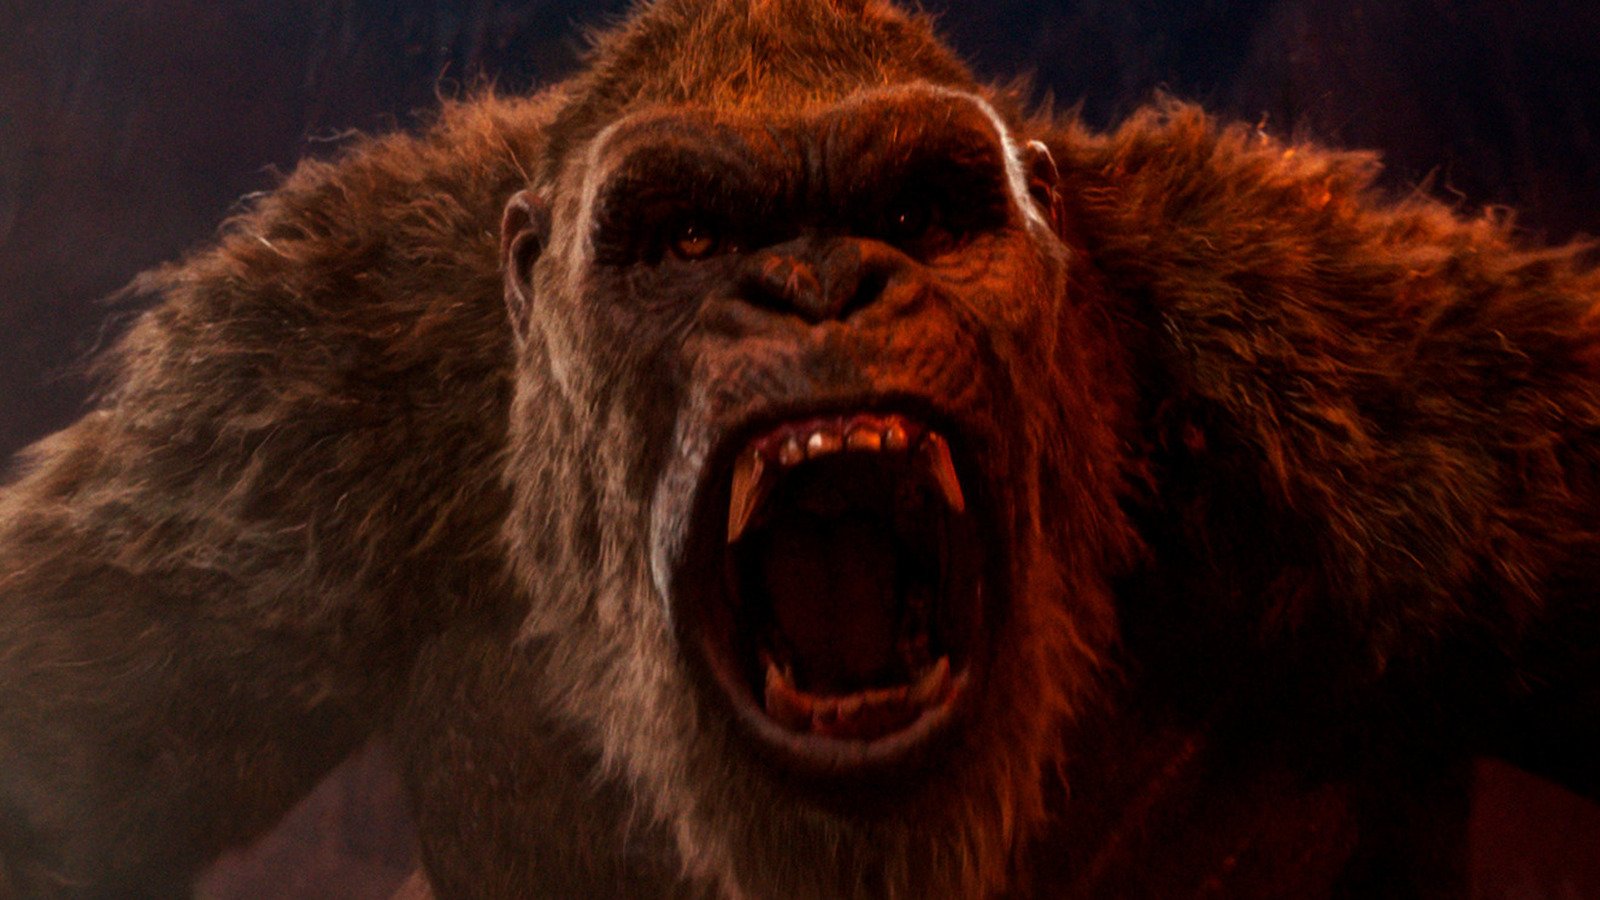 Every King Kong Movie Ranked From Worst To Best